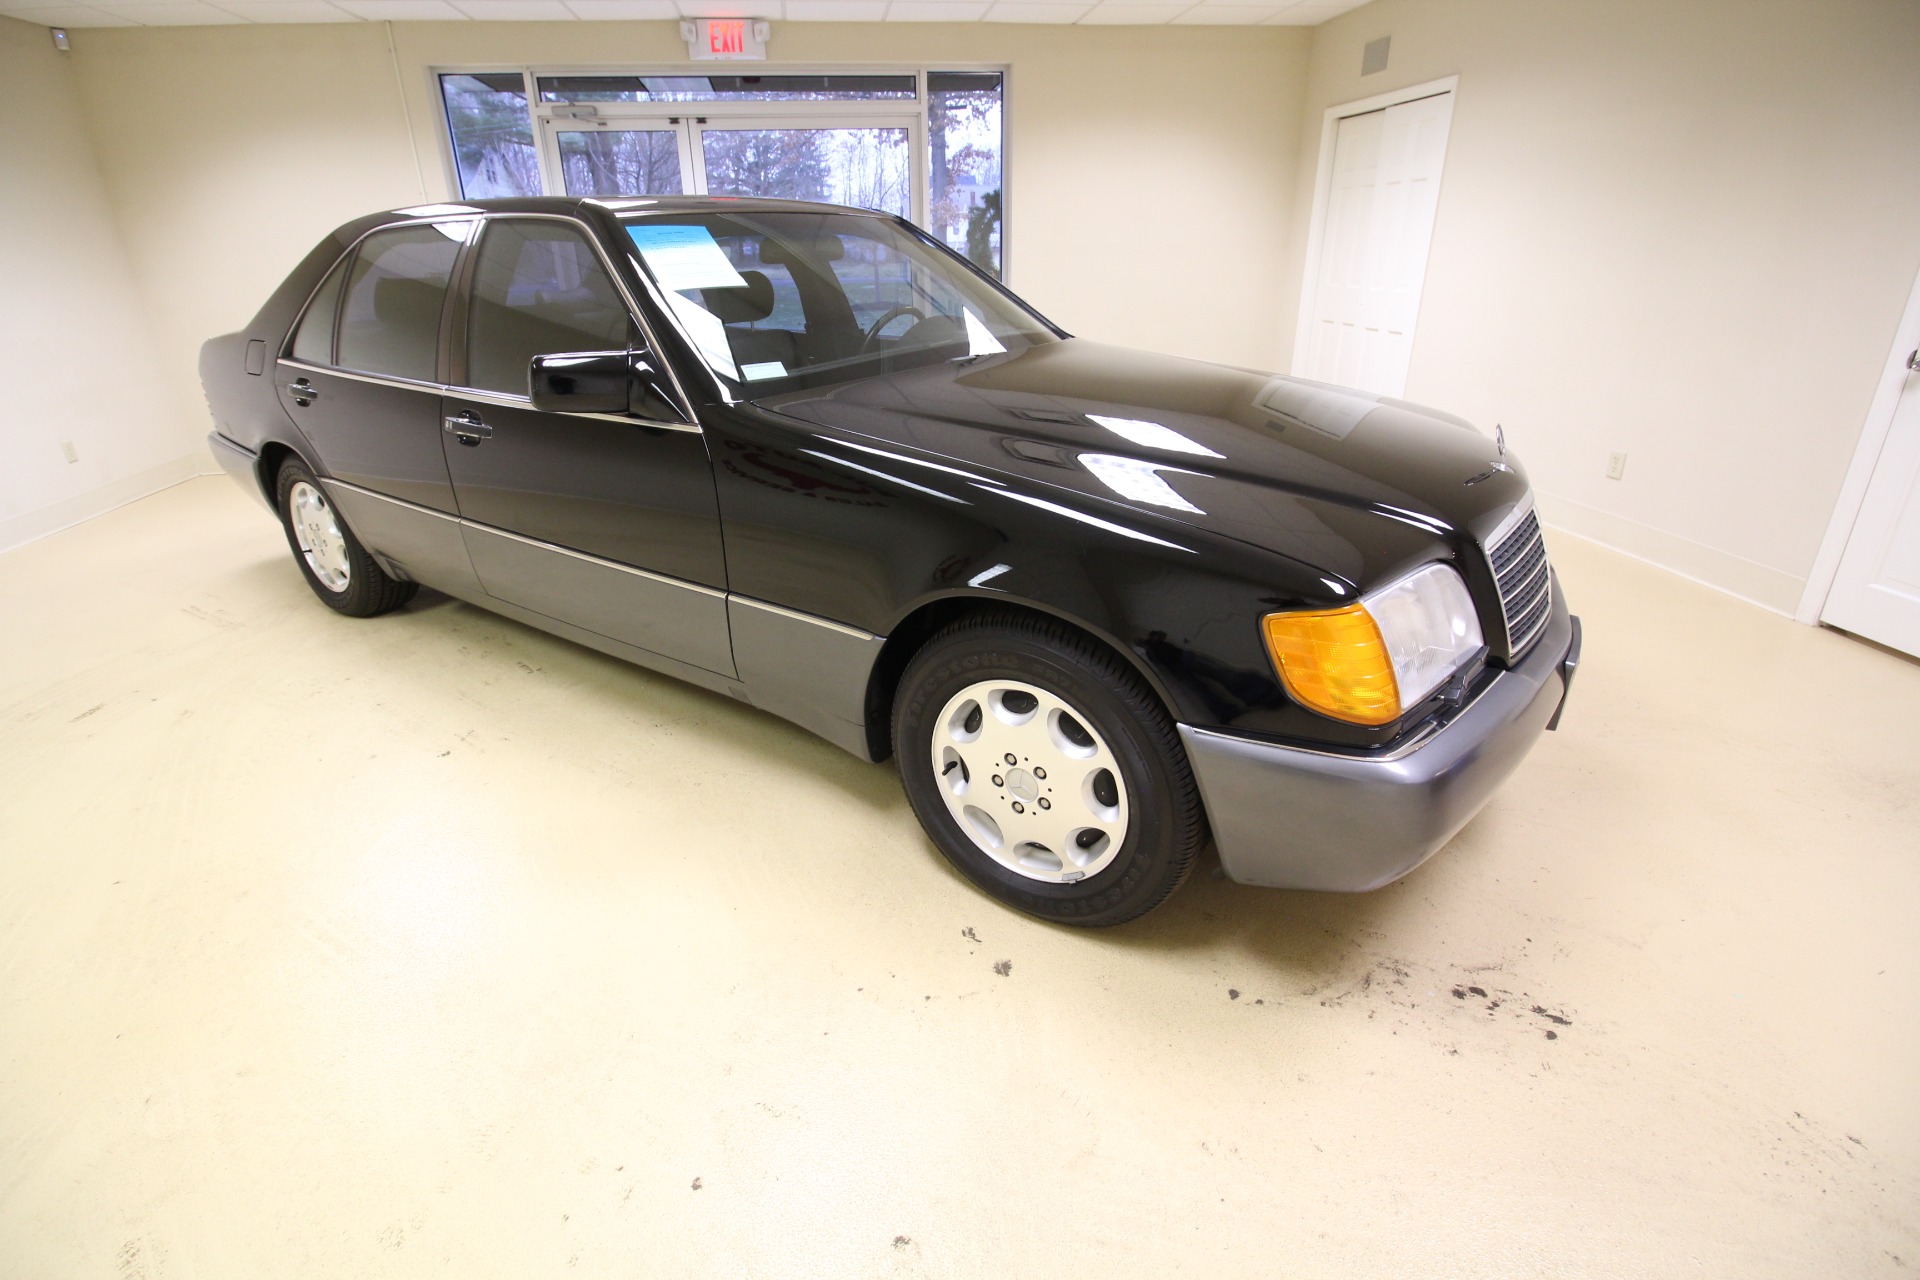 Used 1993 BLACK Mercedes-Benz S-Class 400SEL SEDAN SUPERB INSIDE AND OUT SPECTACULAR W/ LOW MILES | Albany, NY